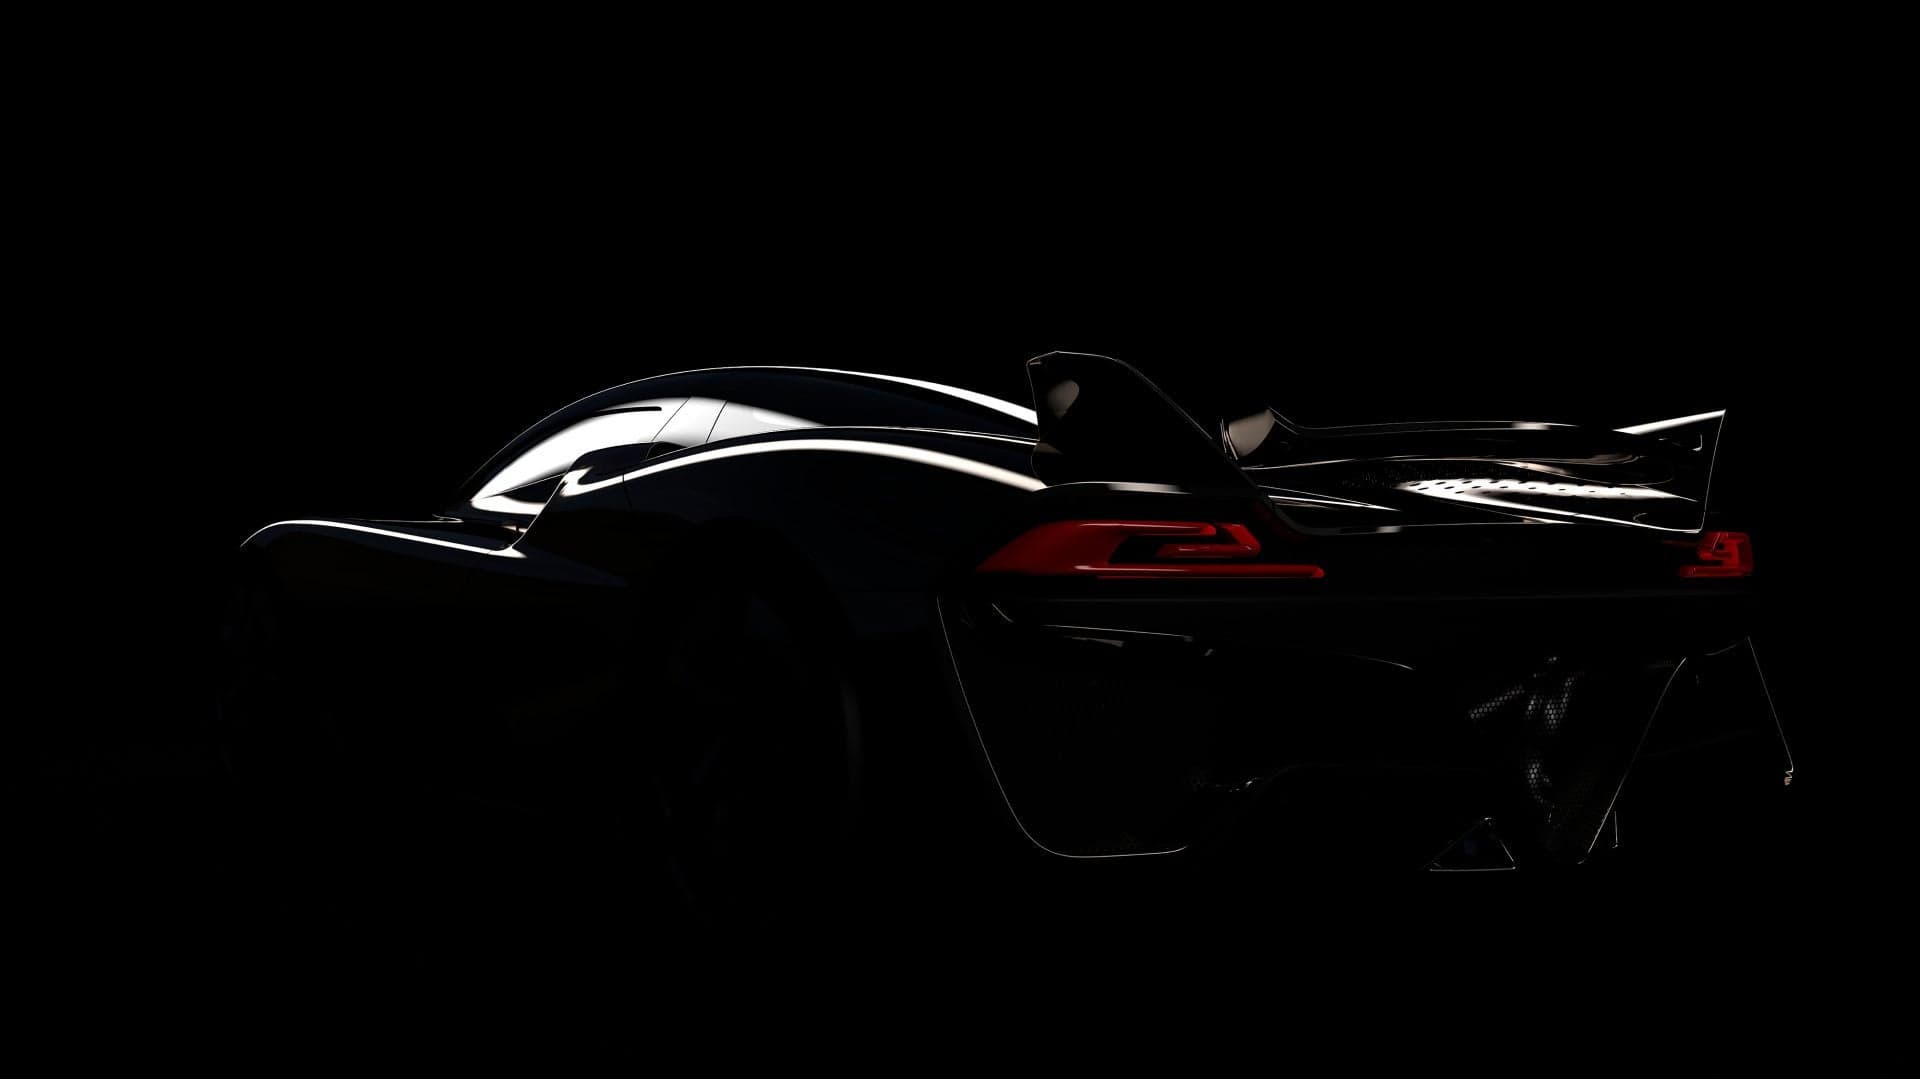 SSC Teases Twin-Turbocharged V8 Engine for Upcoming Tuatara Supercar